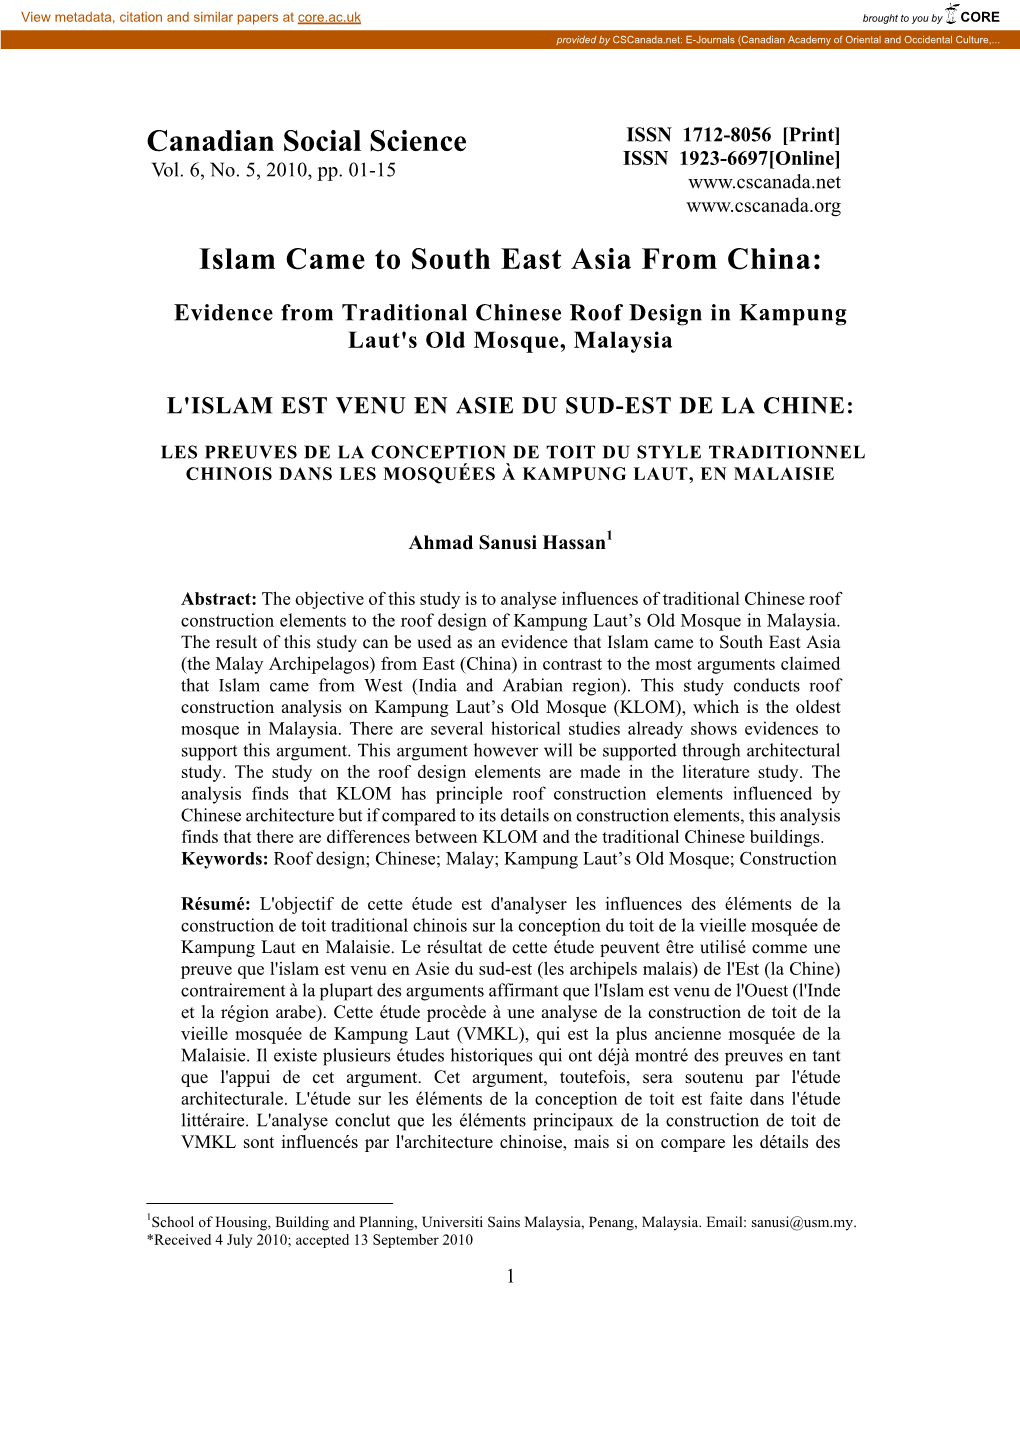 Canadian Social Science Islam Came to South East Asia from China